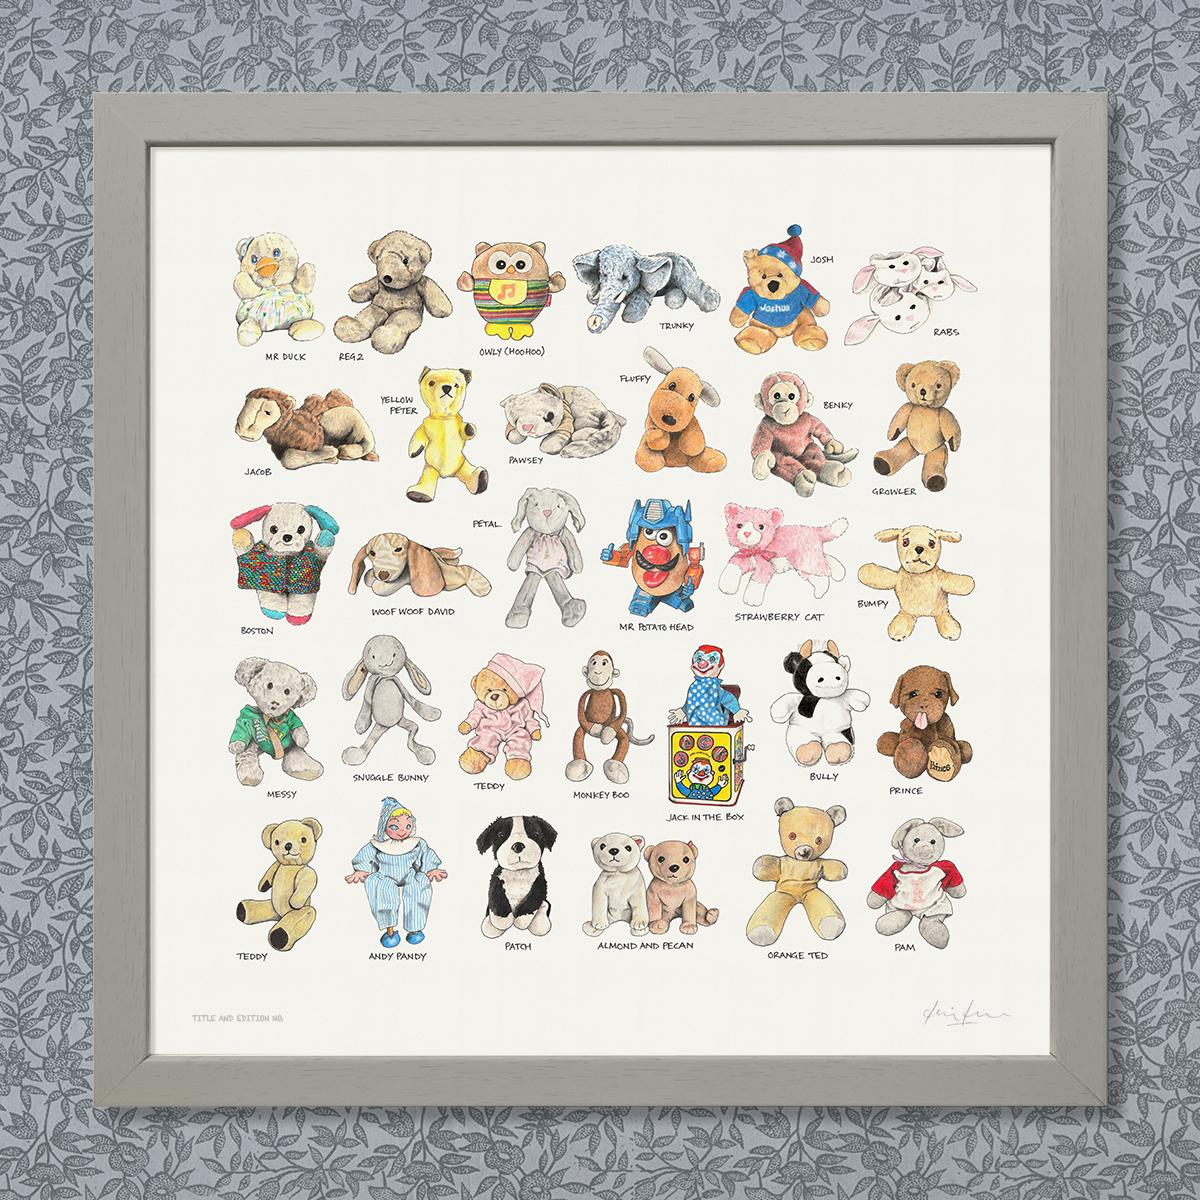 Limited edition montage print of sketches in pen, ink and coloured pencil of much loved toys, in a grey frame.